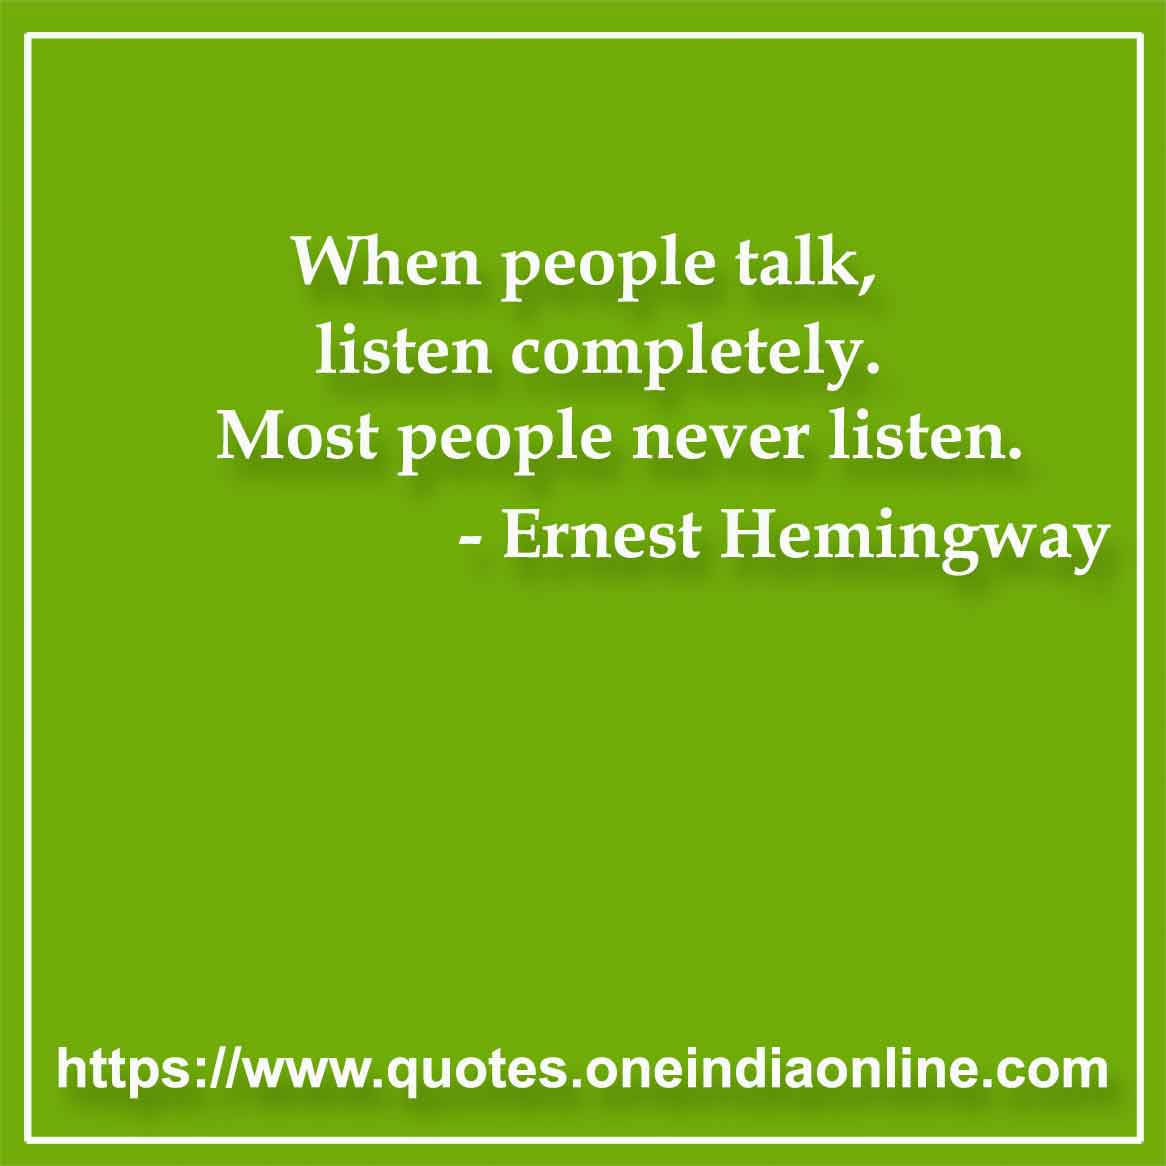 When people talk, listen completely. Most people never listen.

- Listening Quotes by Ernest Hemingway 